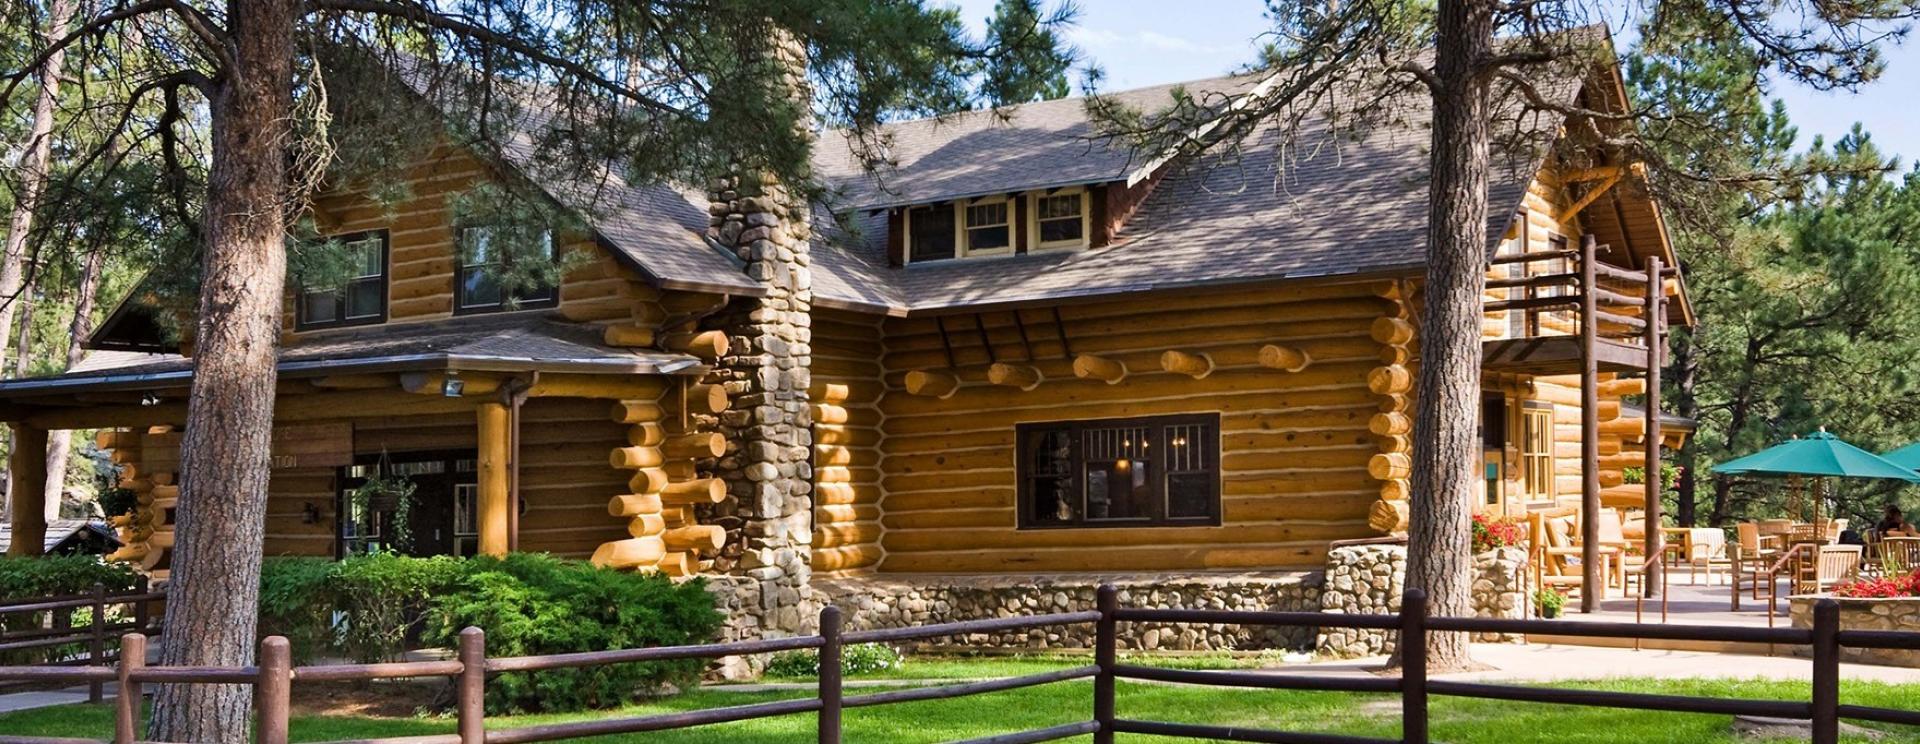 Blue Bell Lodge at Custer State Park Resort